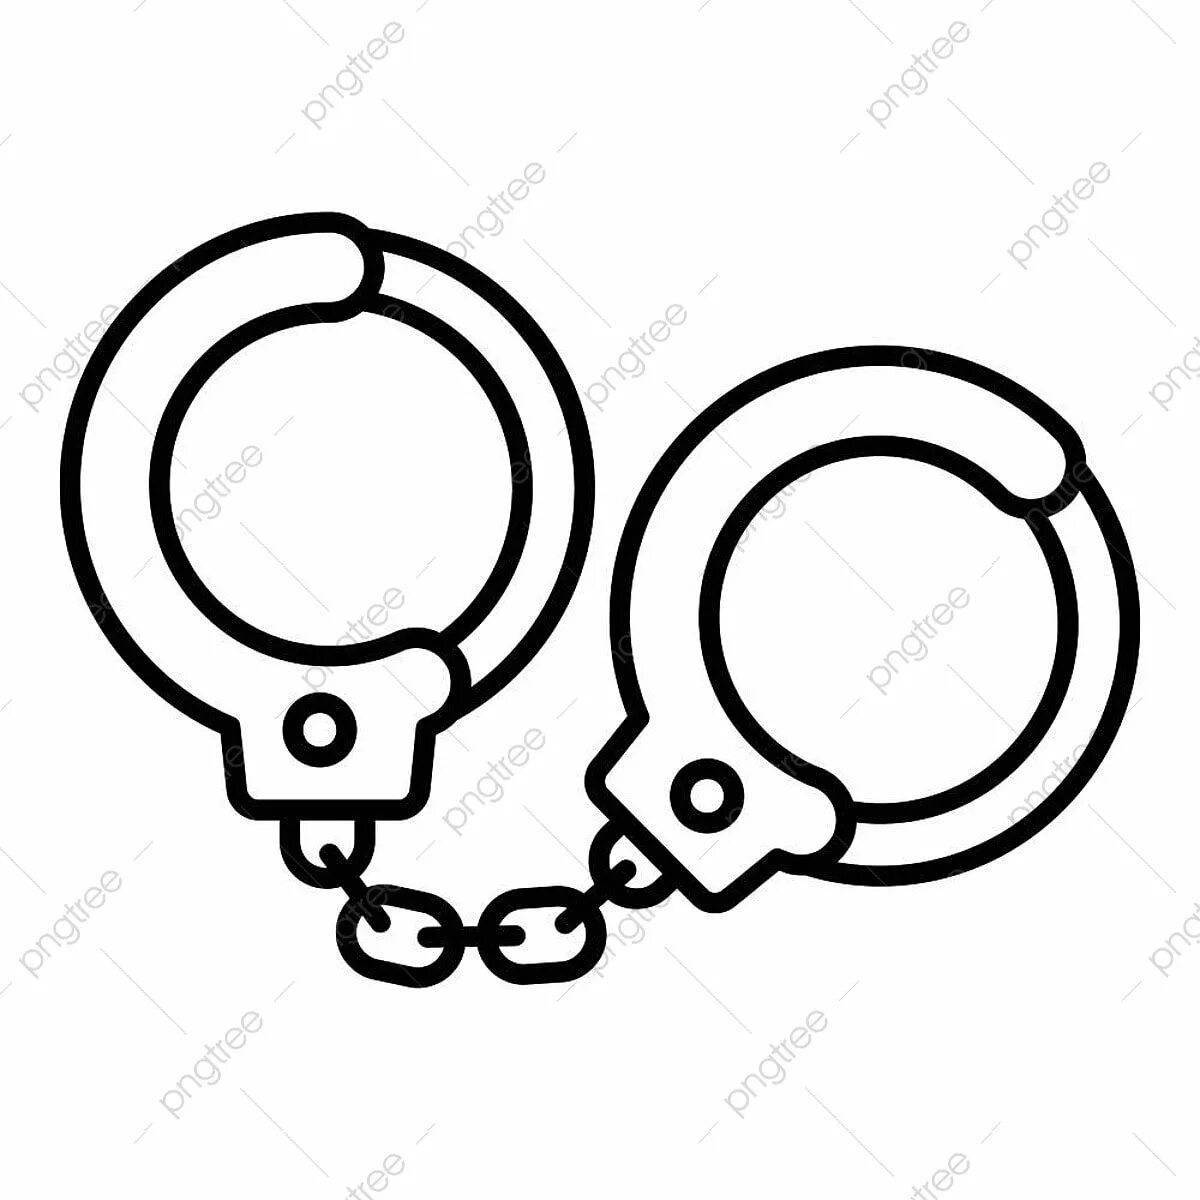 Coloring book humorous handcuffs